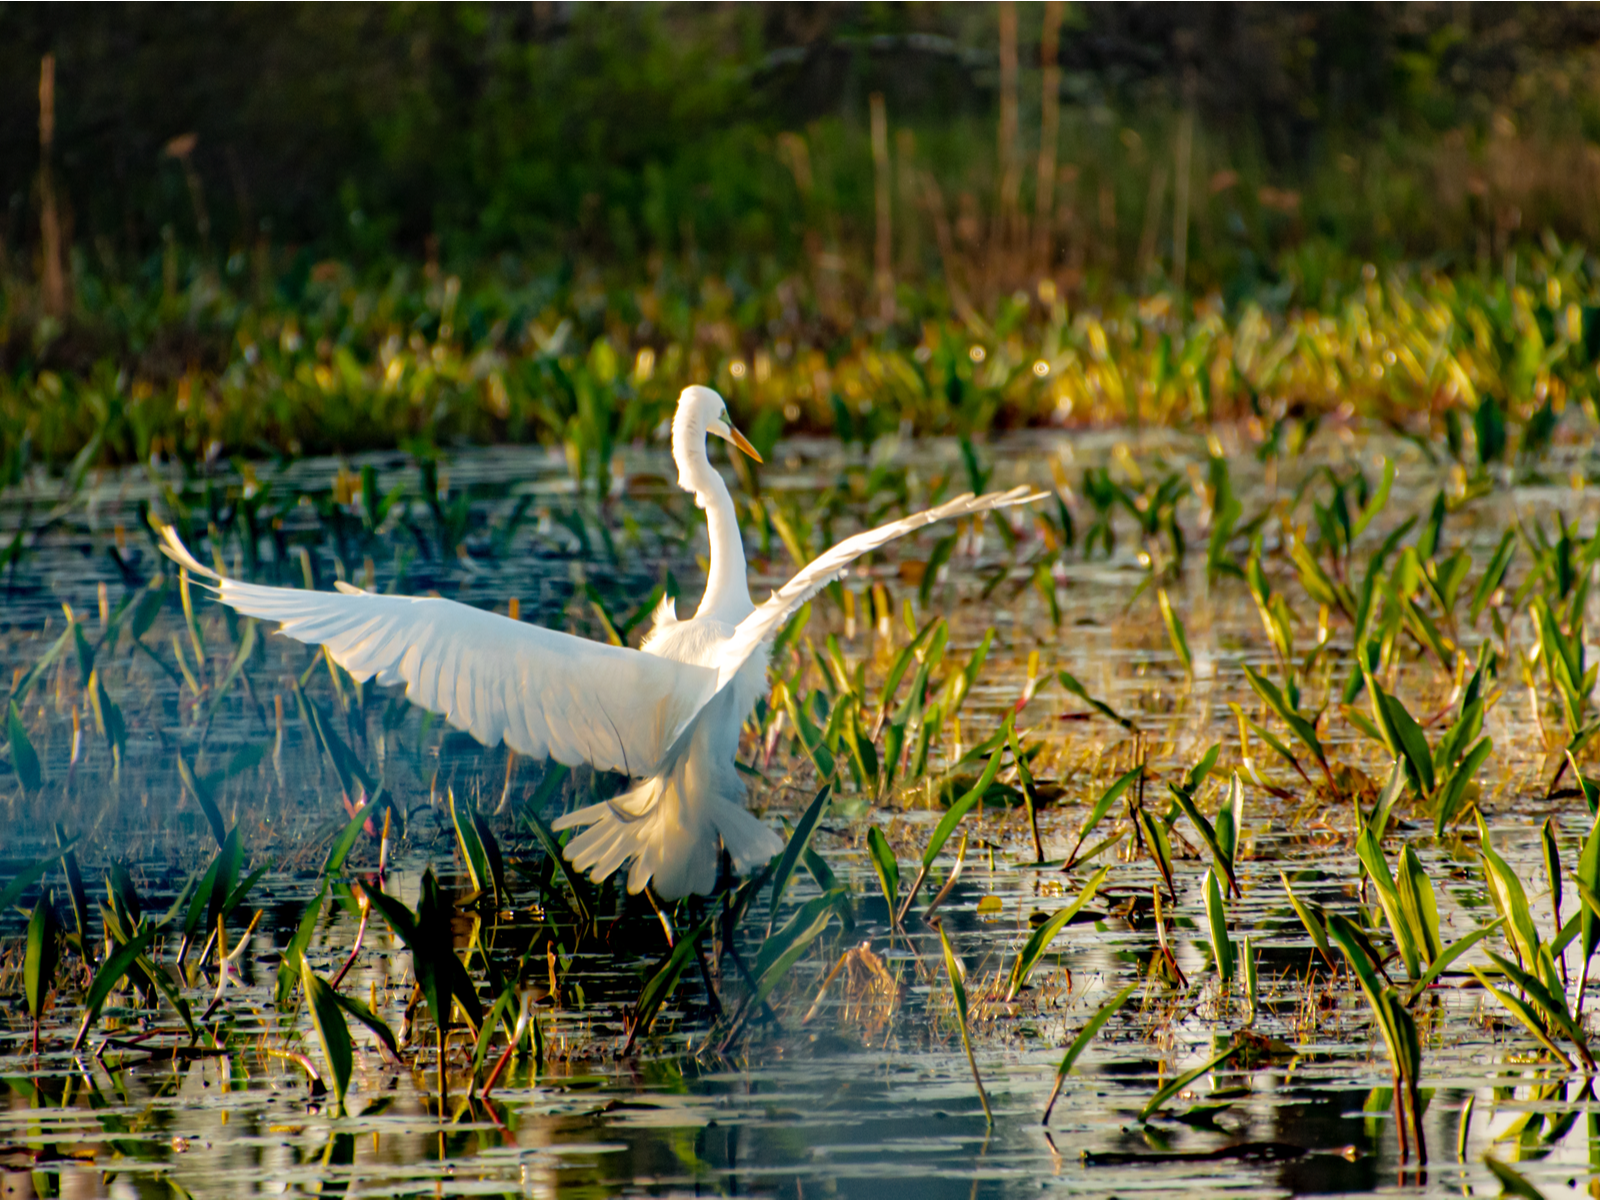 A White Egret landing on a shallow swamp with water plants in Okefenokee Swamp, a piece on the best tourist attractions in Georgia